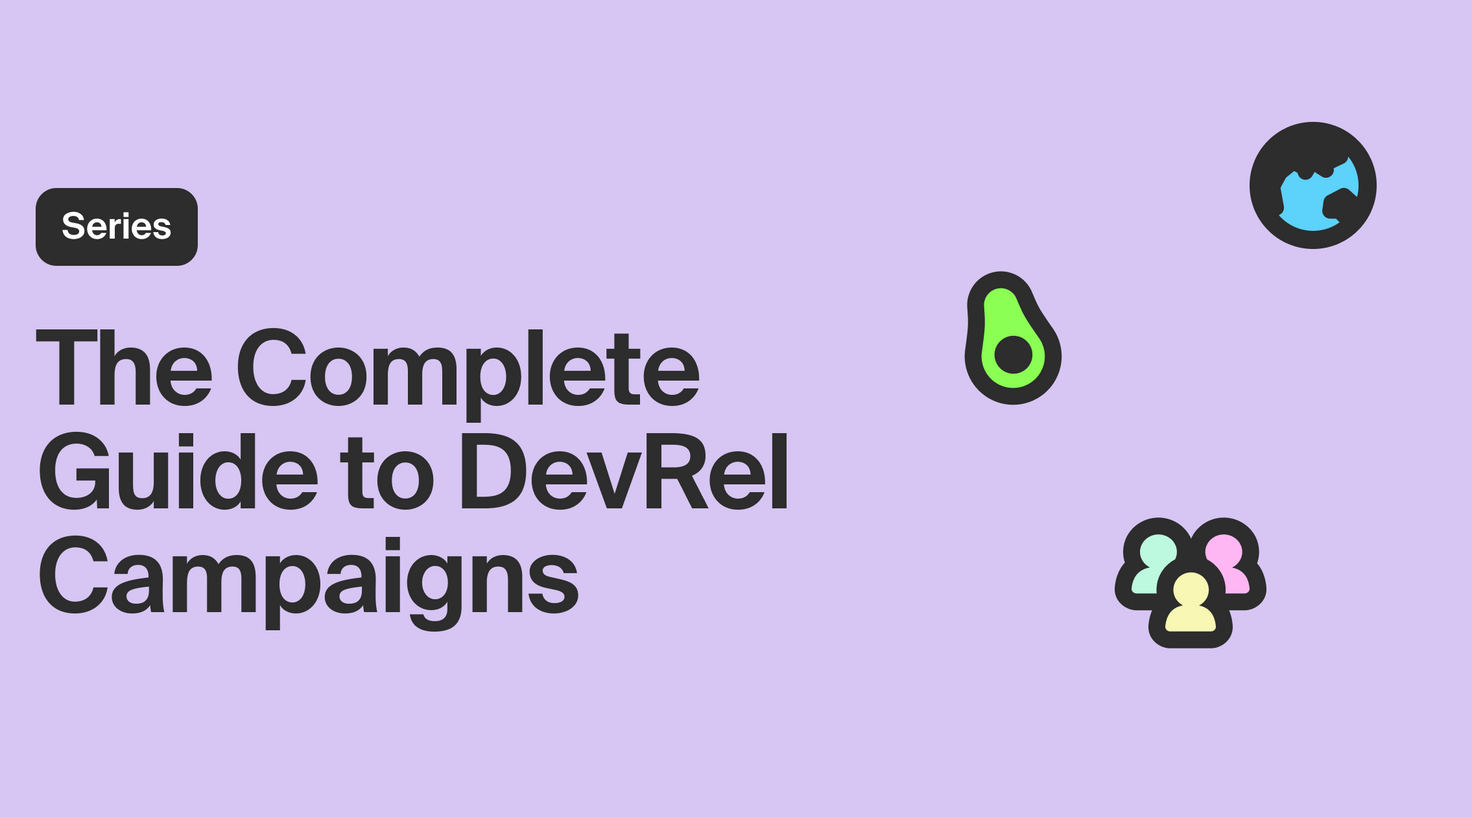 What Is a DevRel Campaign? The Complete Guide